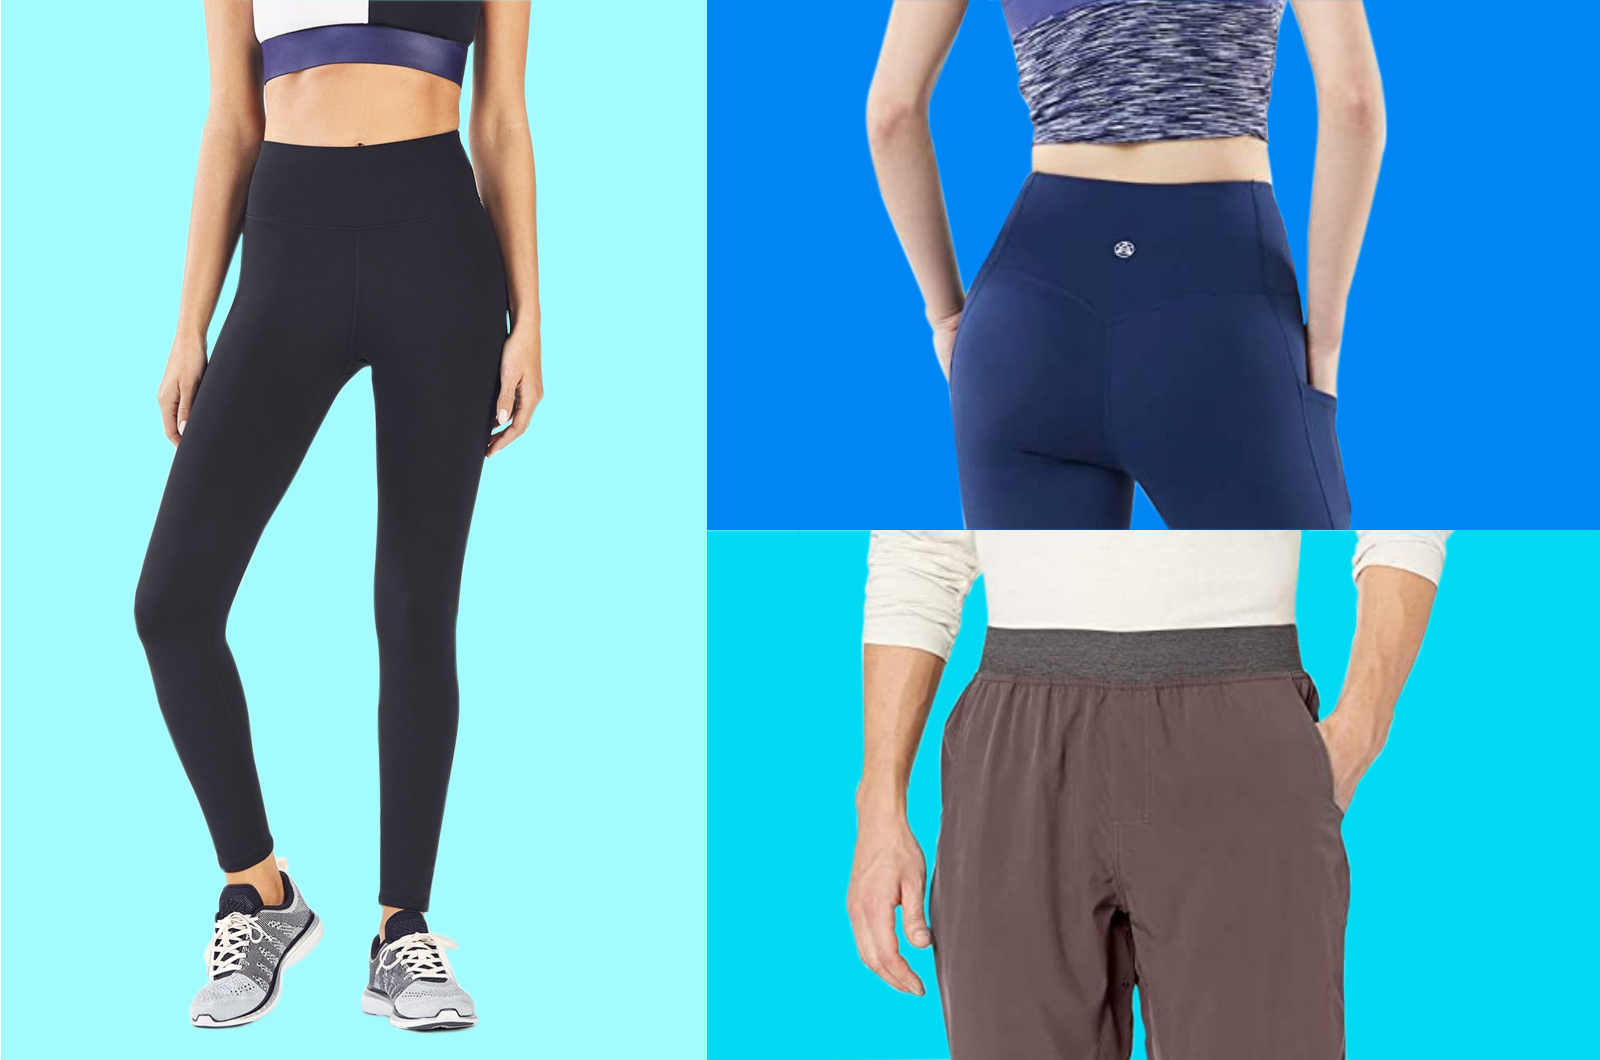 10 Reasons Why Yoga Pants are Better than Jeans – YogaClub